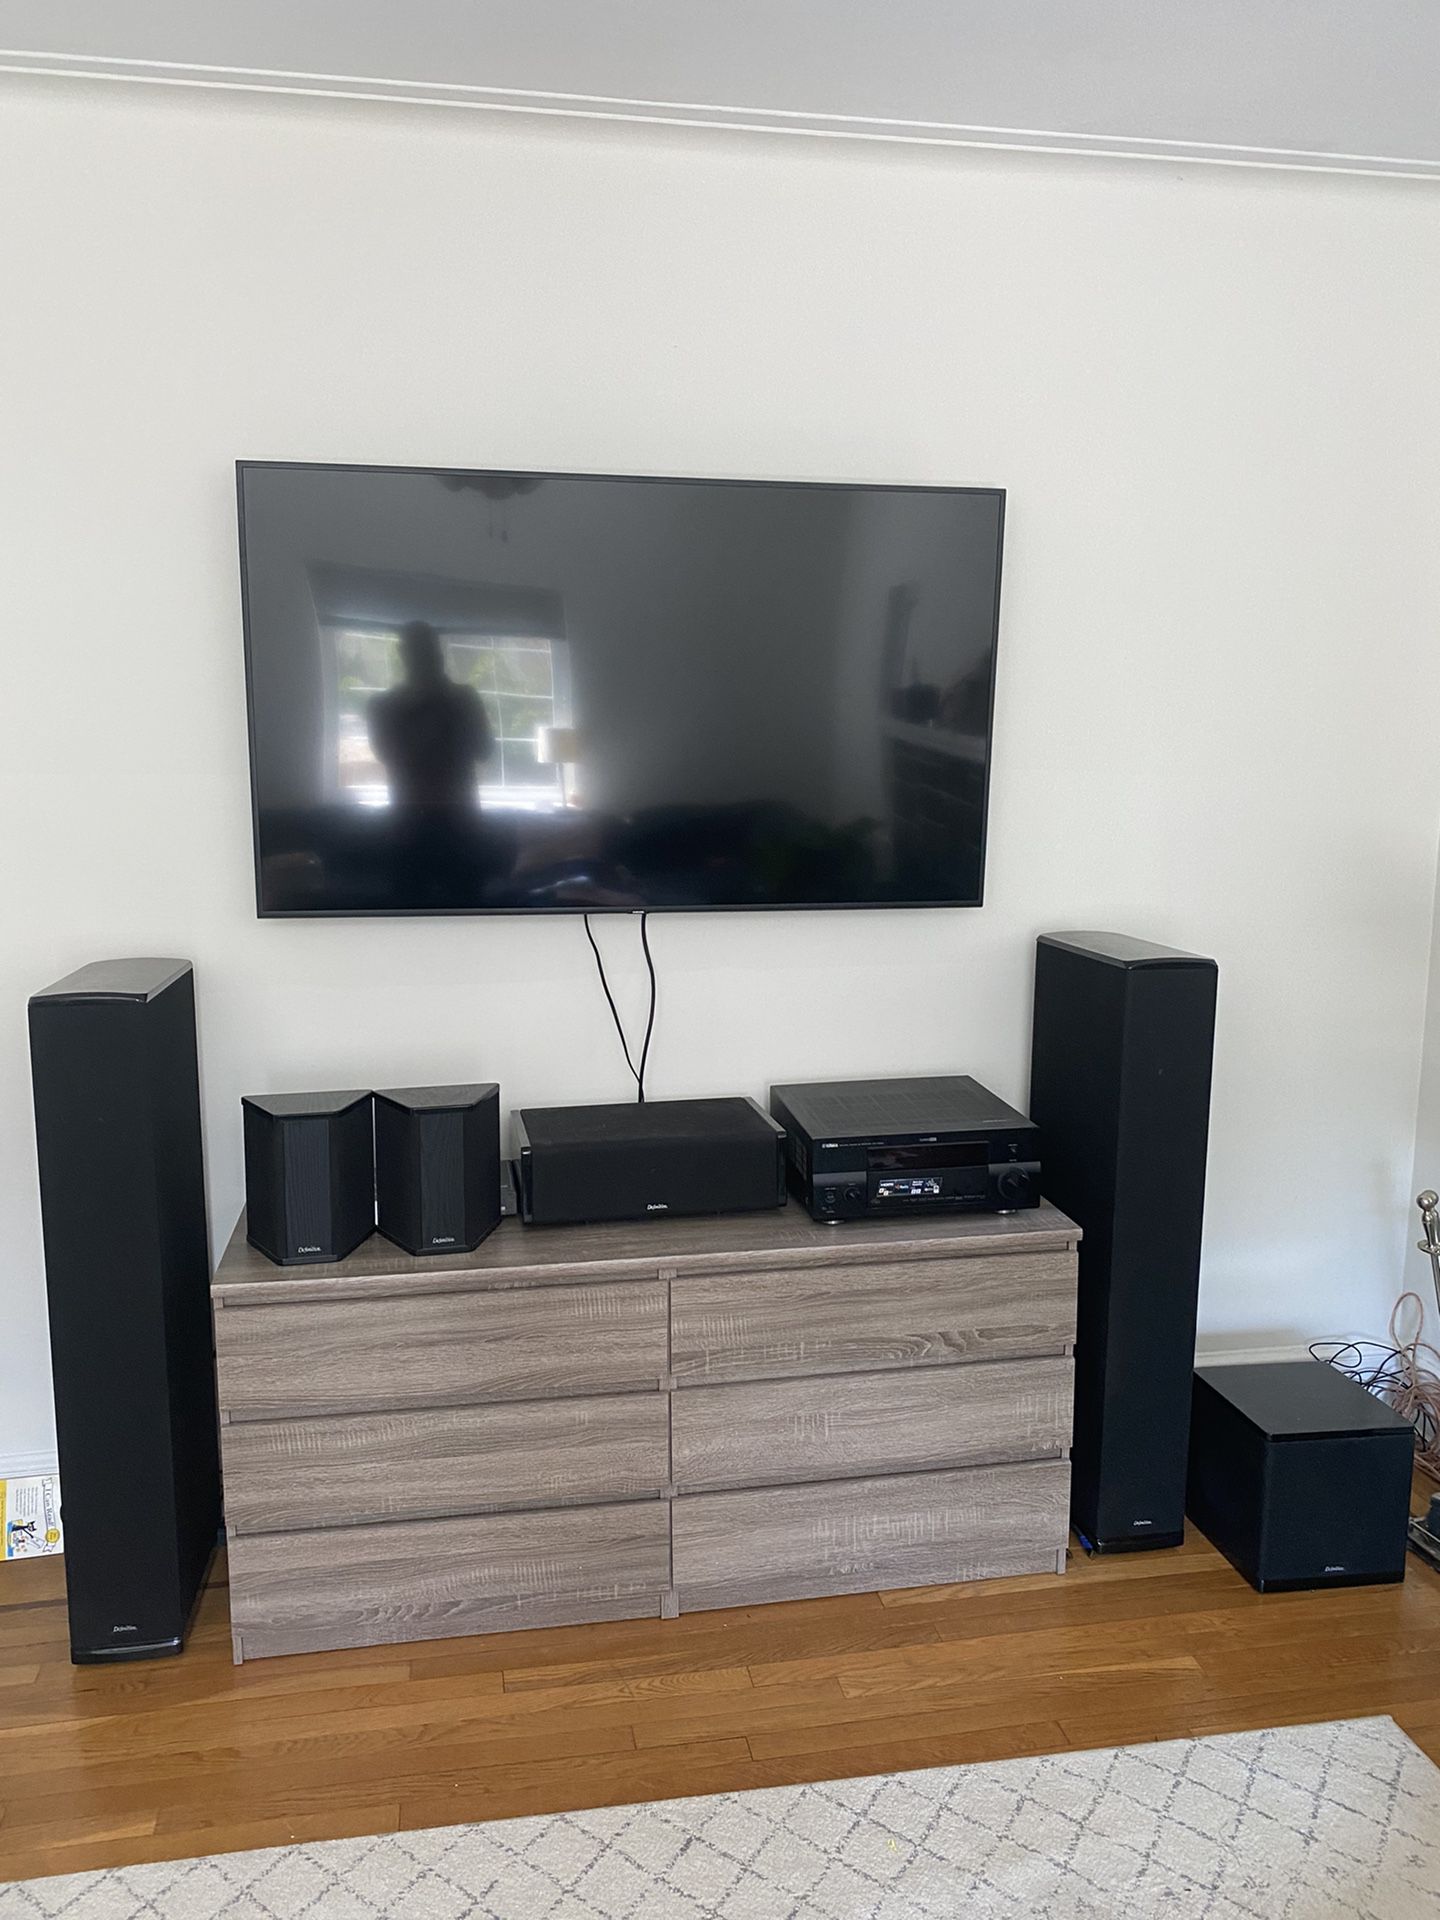 Definitive Technology Home Theater System